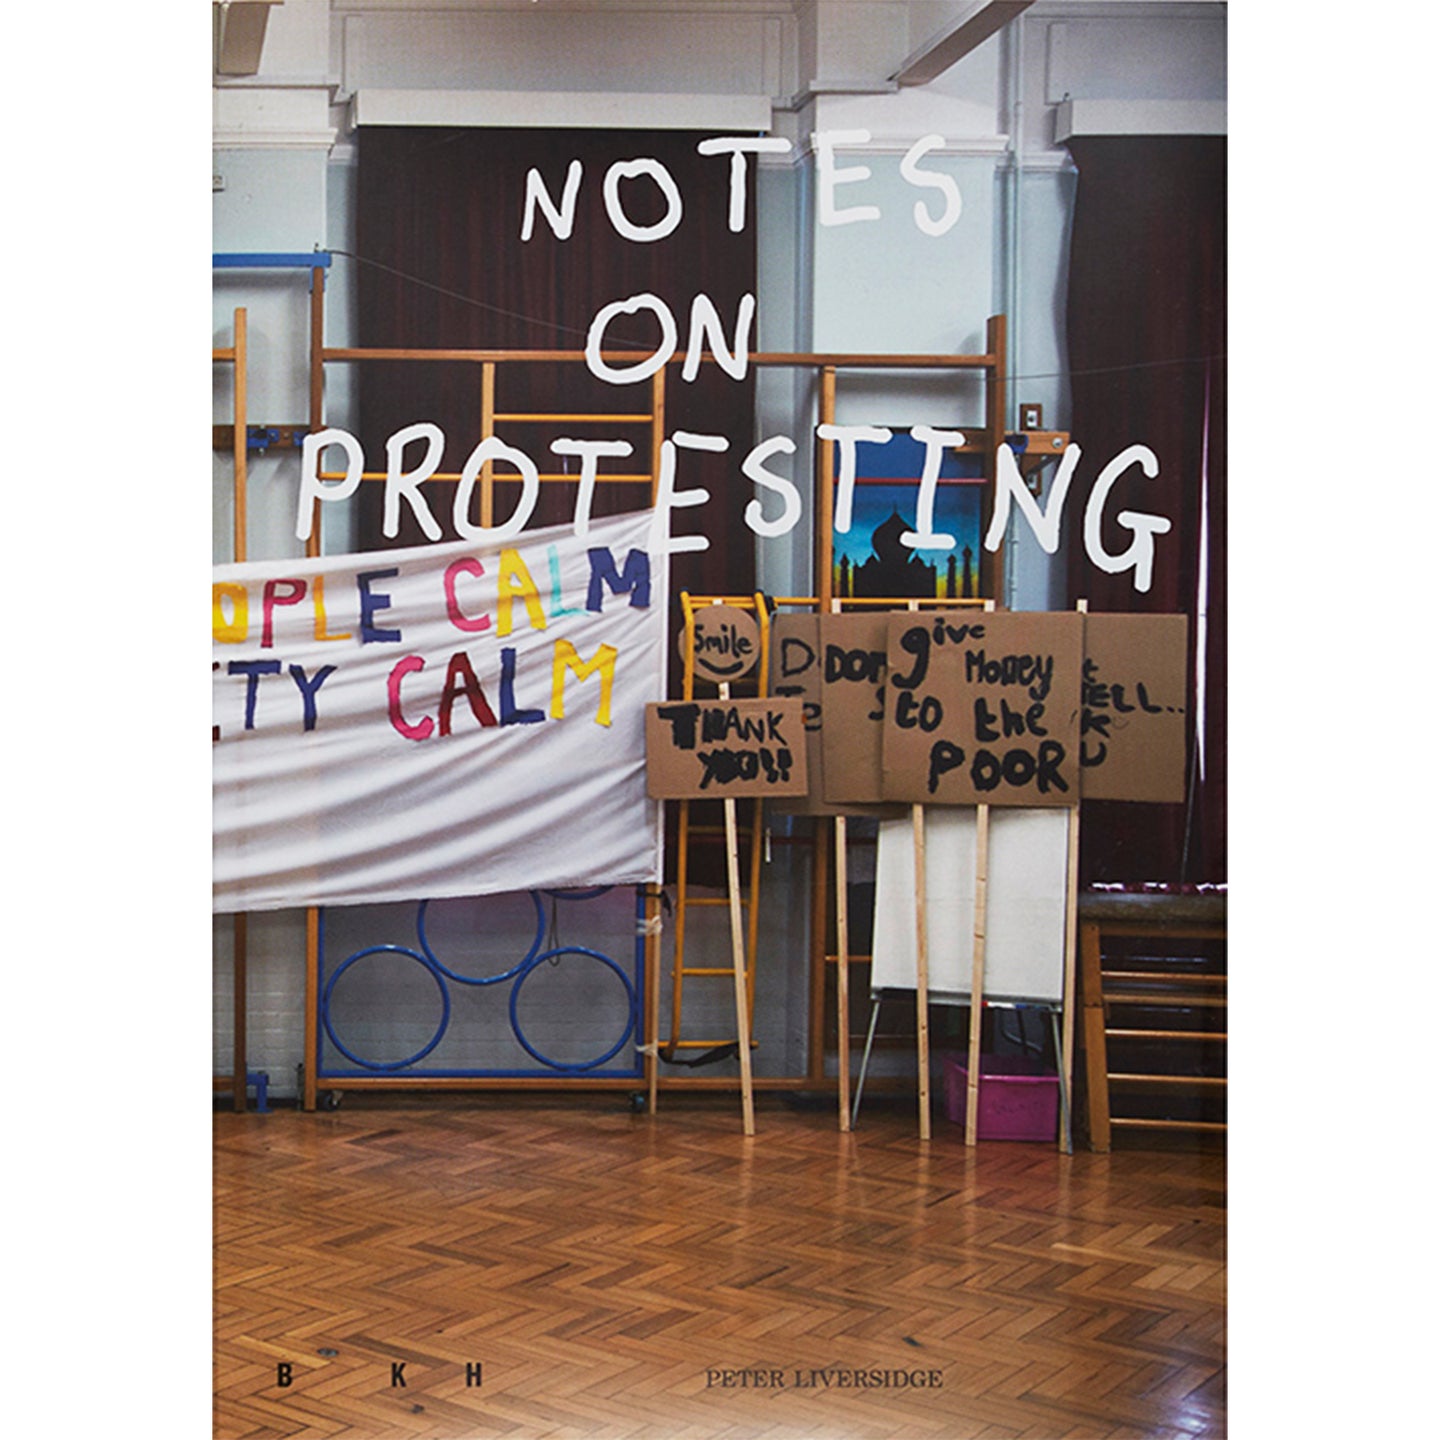 PETER LIVERSIDGE: NOTES ON PROTESTING